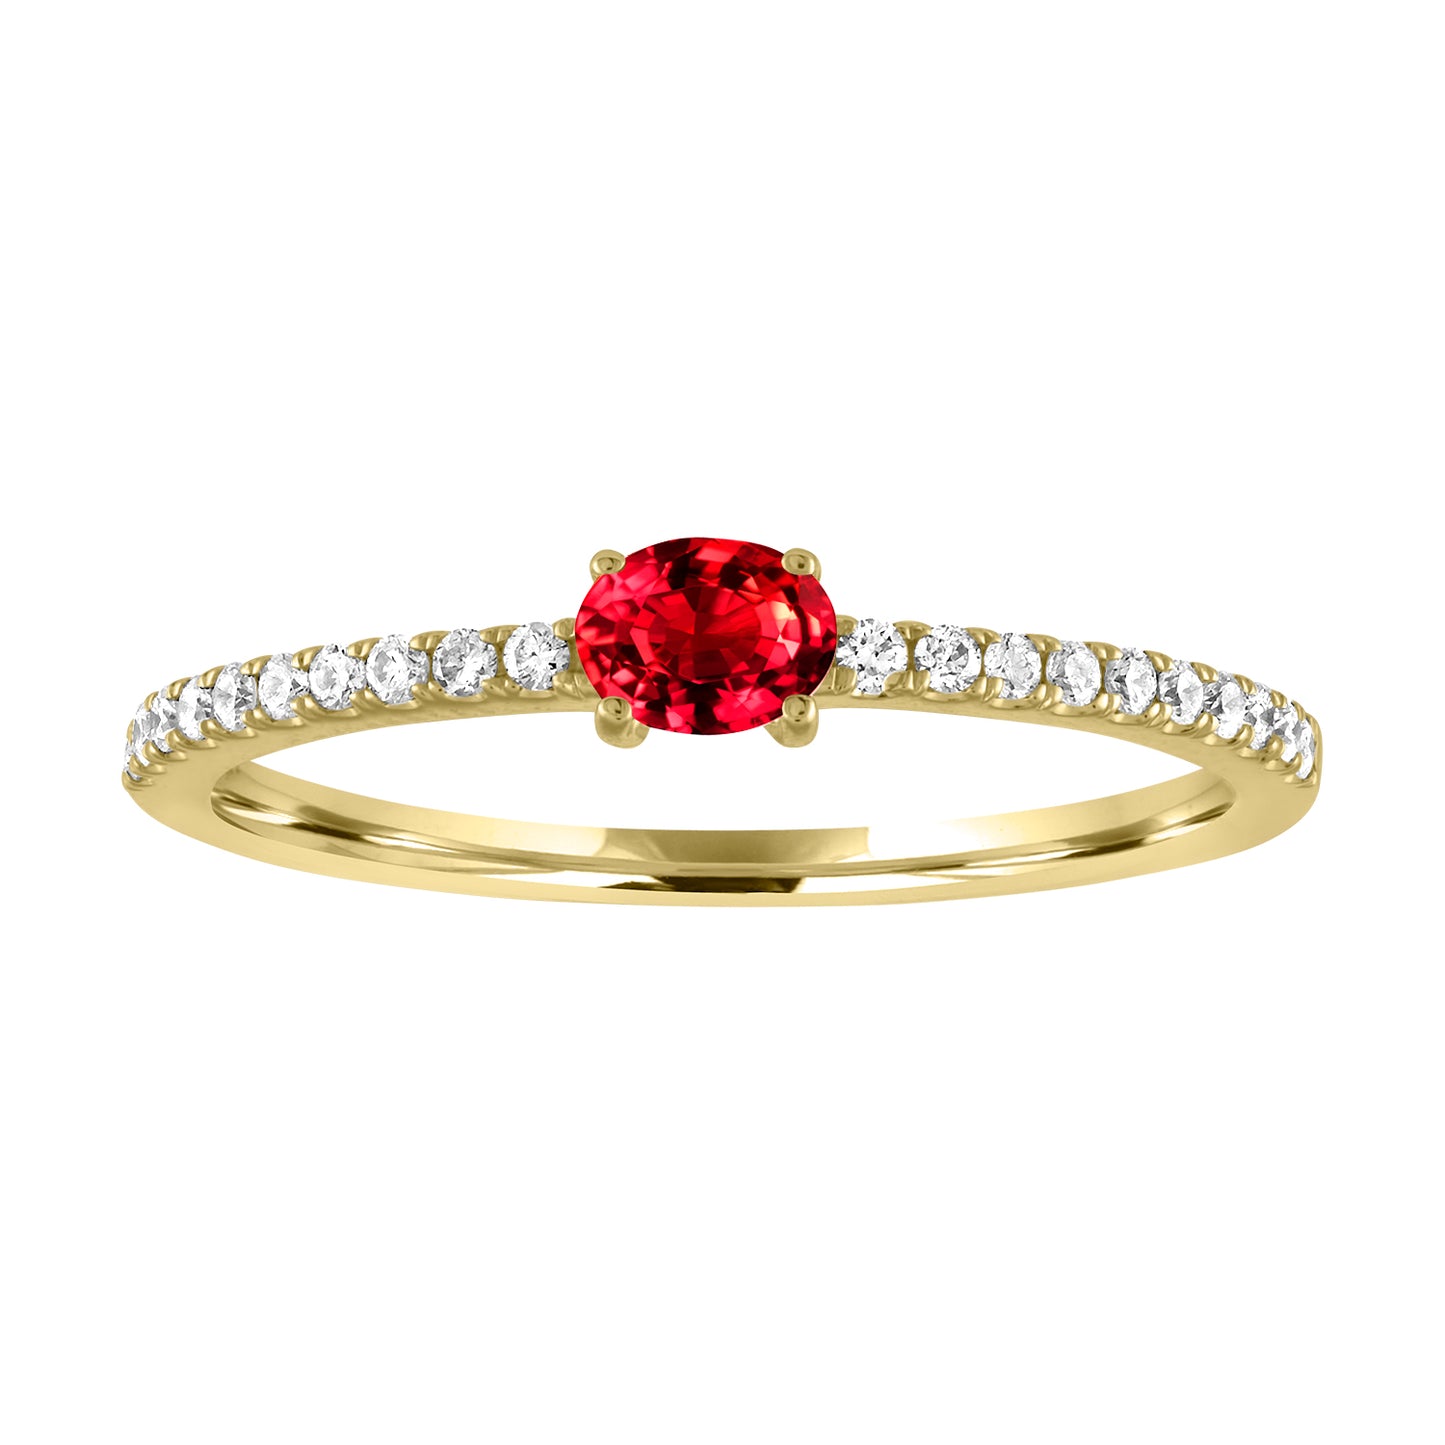 Yellow gold skinny band with an oval ruby in the center and round diamonds on the shank.